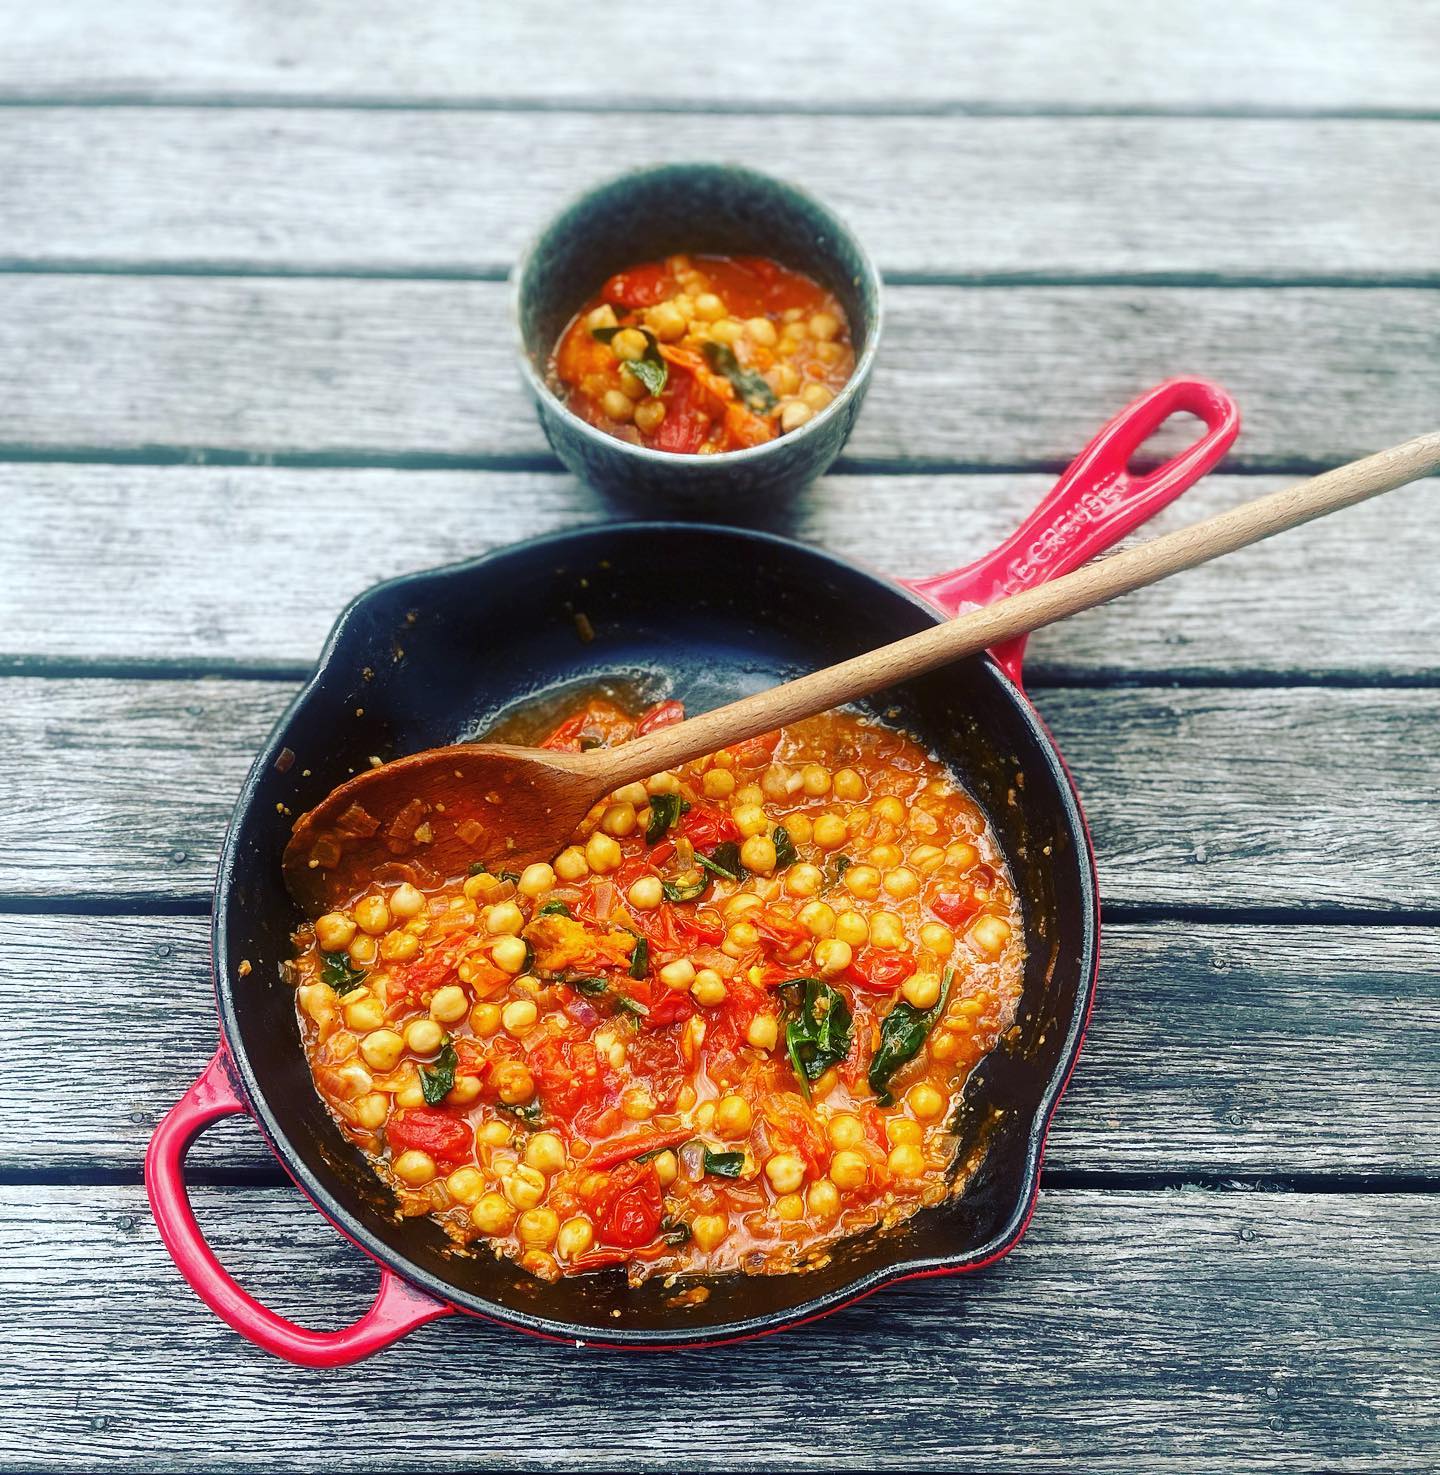 Chickpeas, garlic, red onion, a dash of cumin, cherry tomatoes, a splash of vege stock and a handful of baby spinach and garden herbs - make it your main a not the side - it’s worth it! 
@lecreusetanz 
.
.
.
#thetomatosourcenz #tomato #tomatoes #tomatoesnz #homegrown #vegetables #foodinstagram #thetomatosourcenz #nztomatoes #healthyfood #nz #newzealand #veggies #fruits #5adaynz #vegetablesnz #instagramfood #eatlocal #eatfresh #buylocal #eatwell #5aday #dinnerinspiration #easyrecipes #lateharvest #latesummertomatoes #marchmusings #mealideas